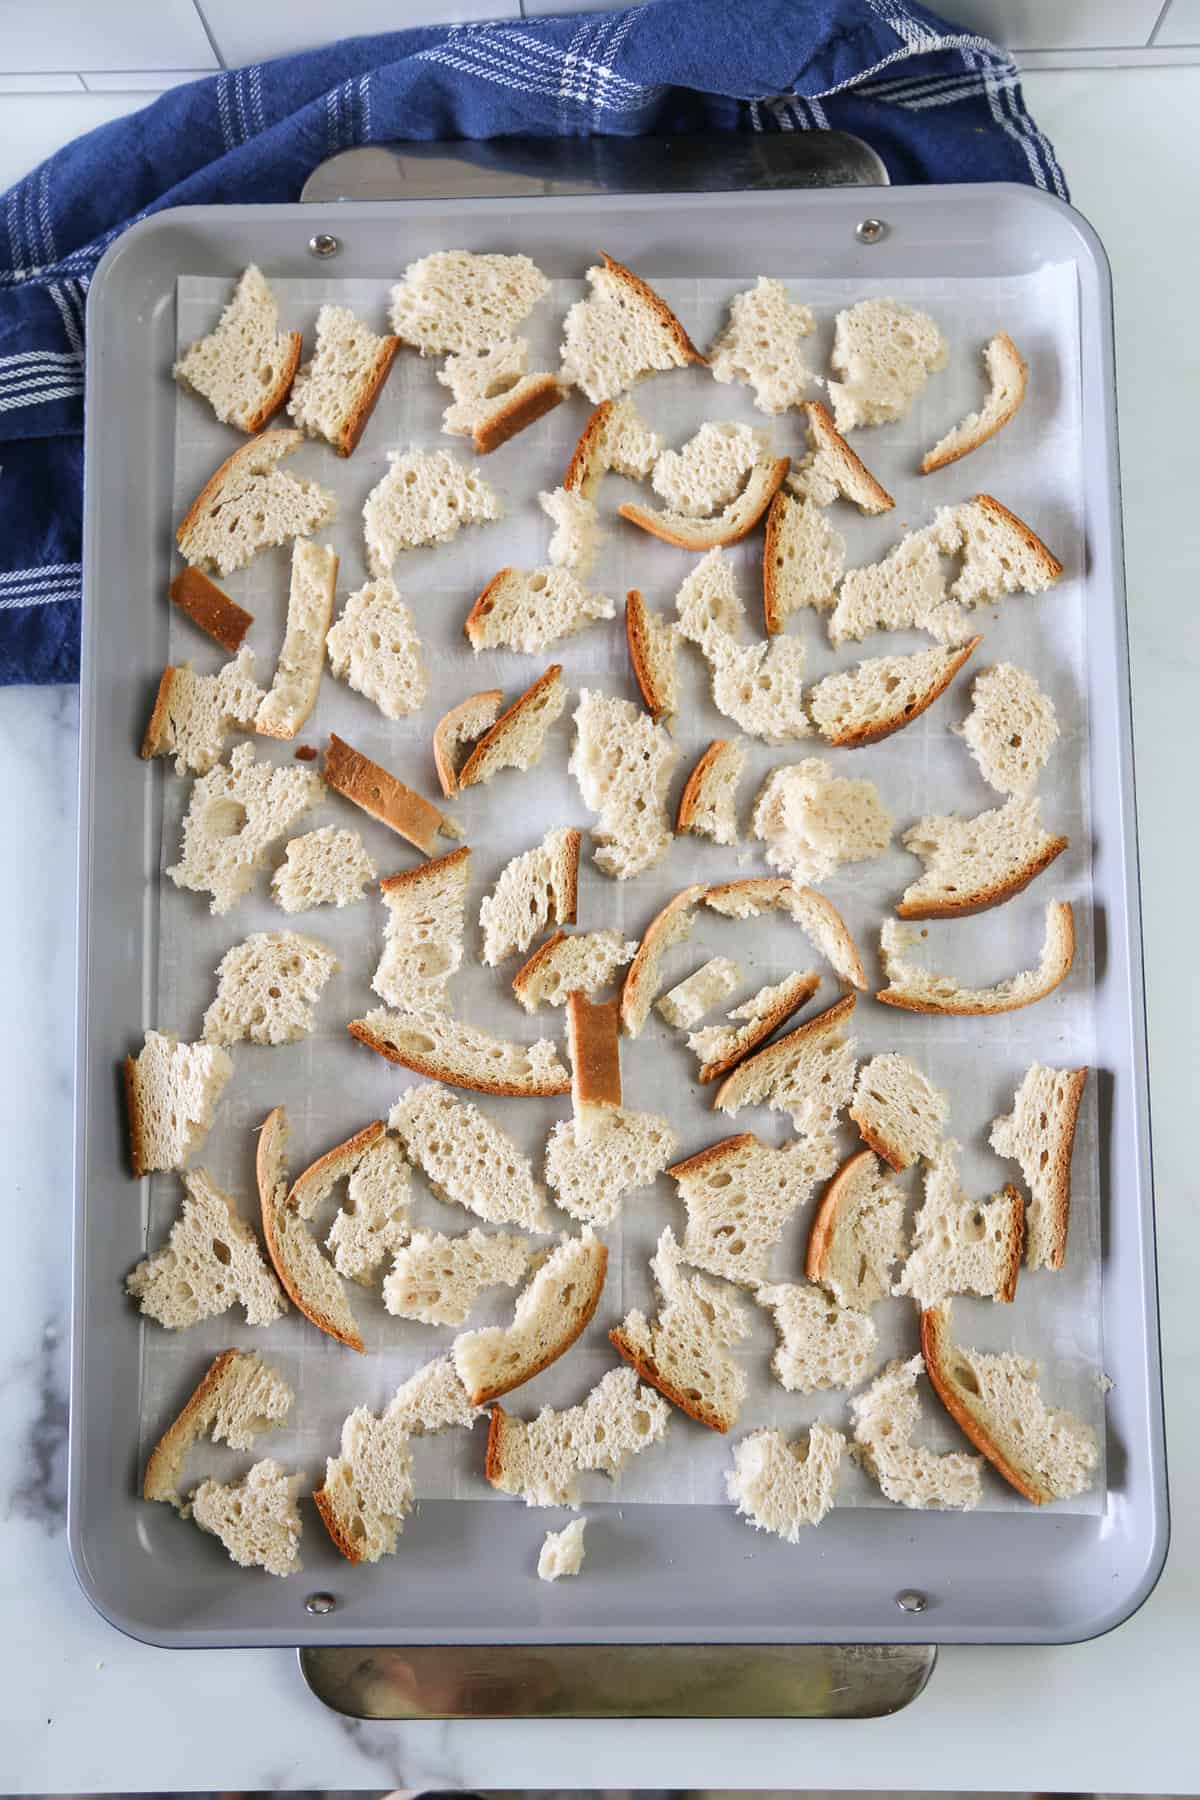 Torn up pieces of stale bread on a parchment-lined baking sheet.